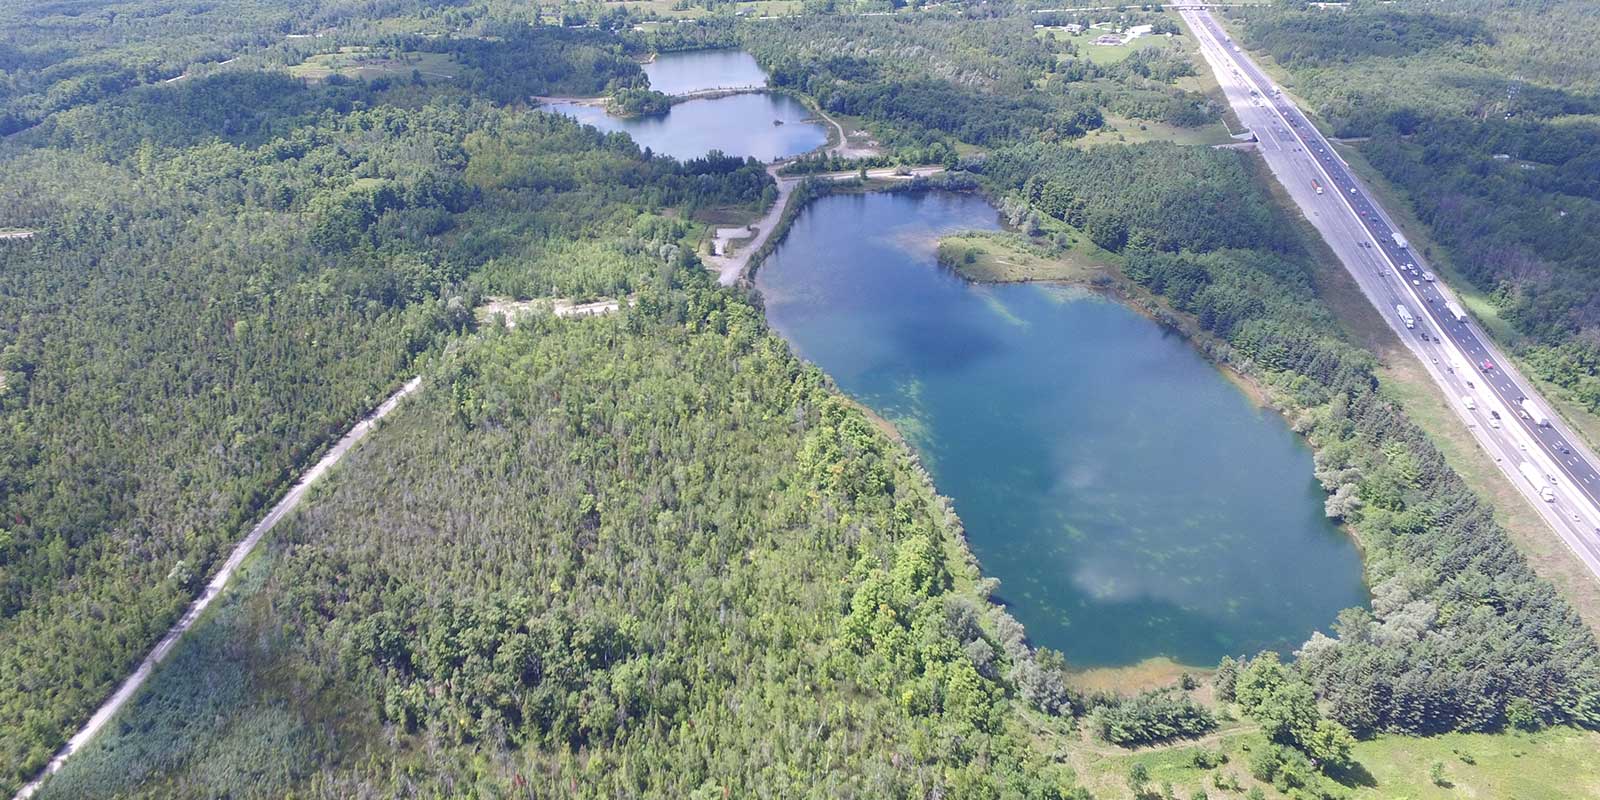 Aerial view of the area where the Campbellville Quarry could be built